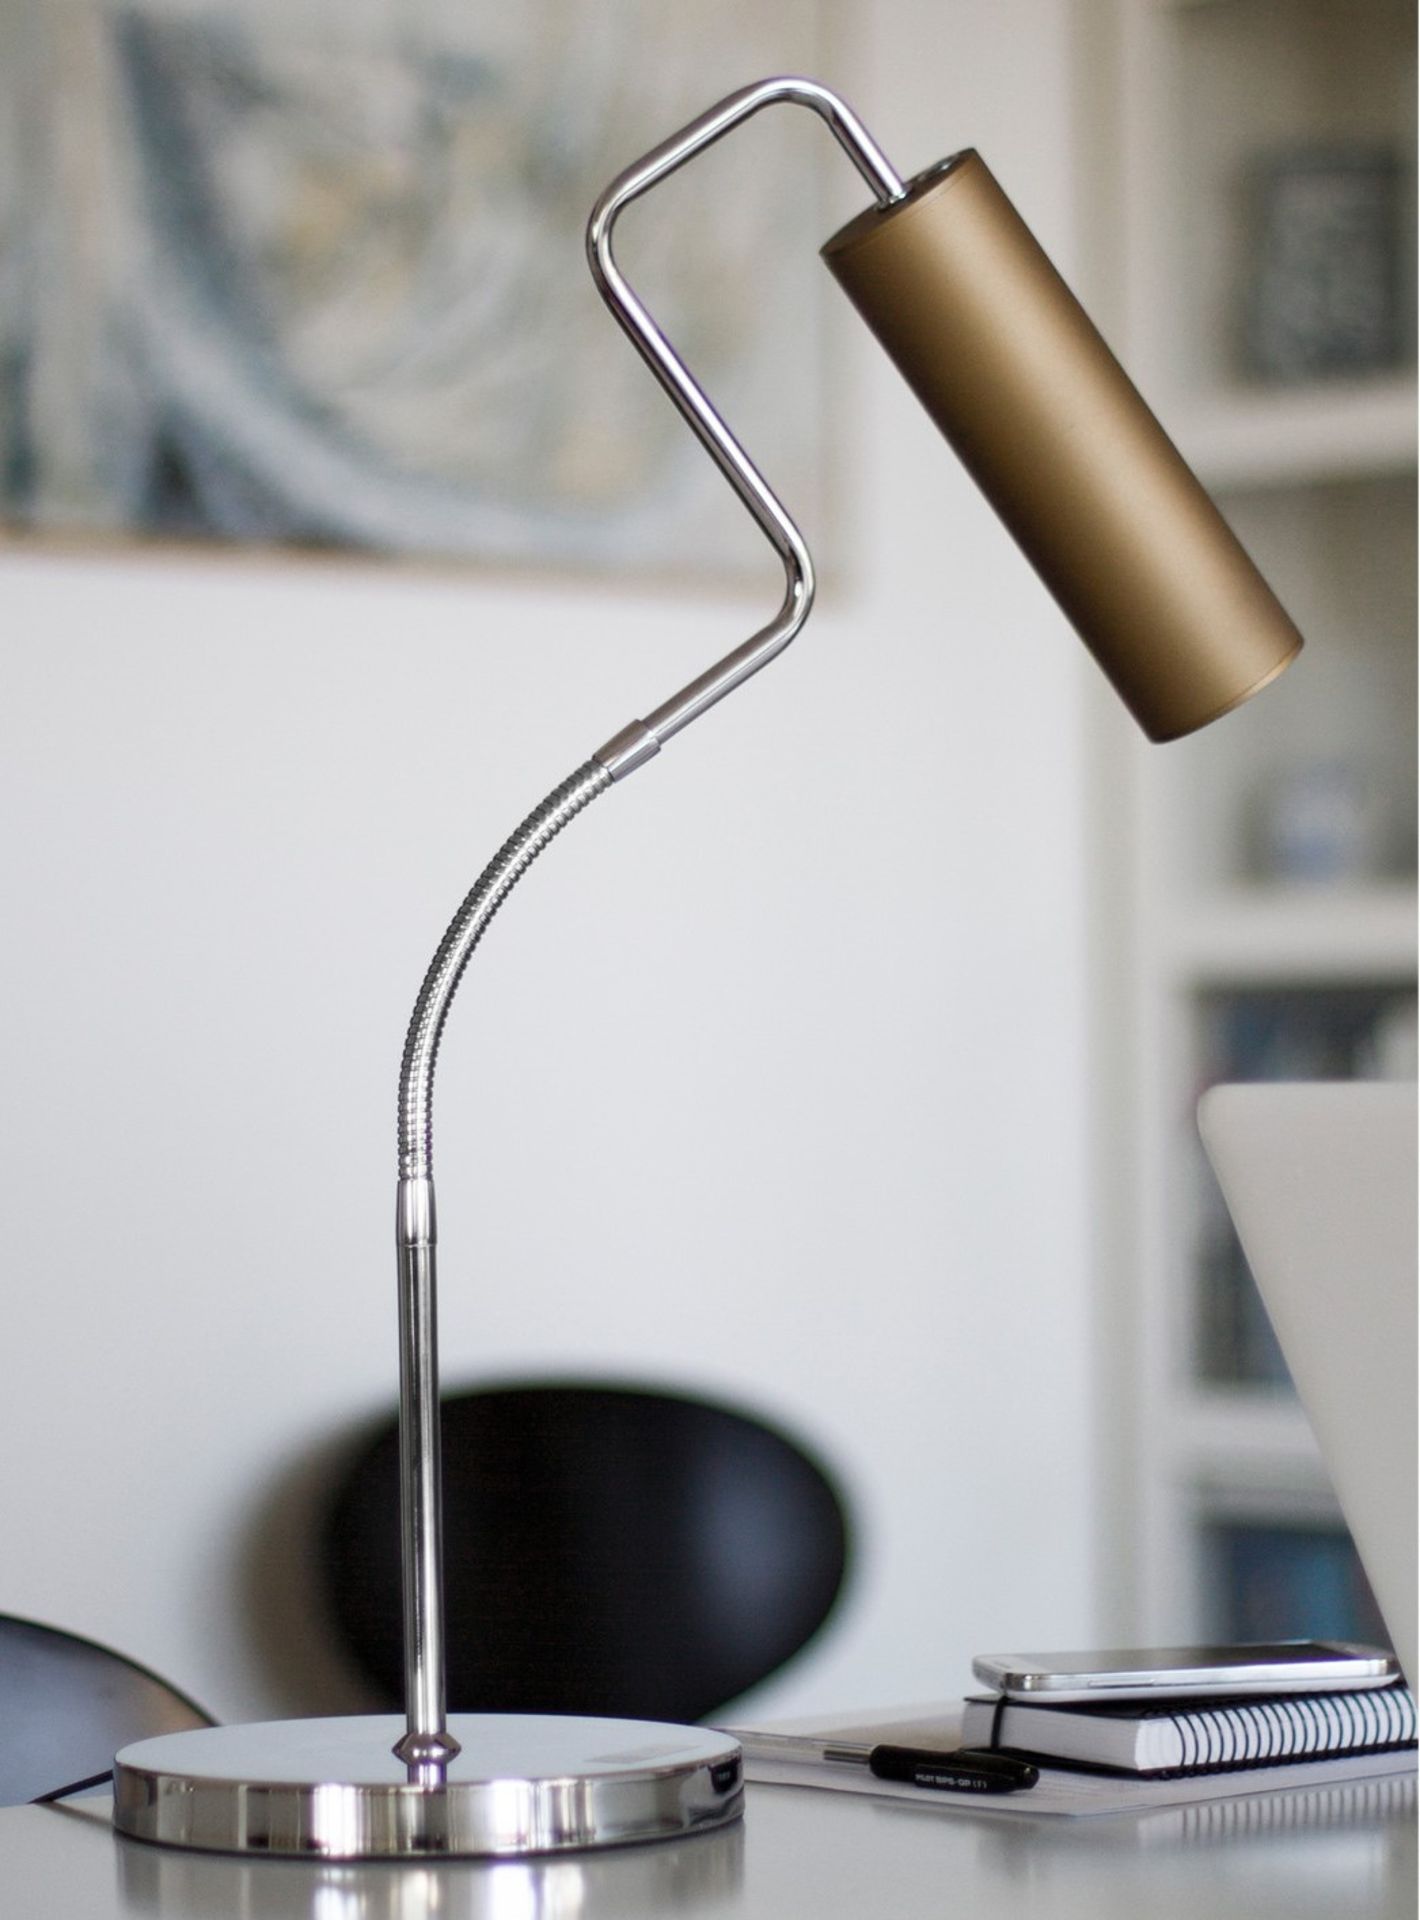 1 x Rydens Pontus Contemporary LED 5w Desk Lamp With Adjustable Flexi Head and Inline On/Off